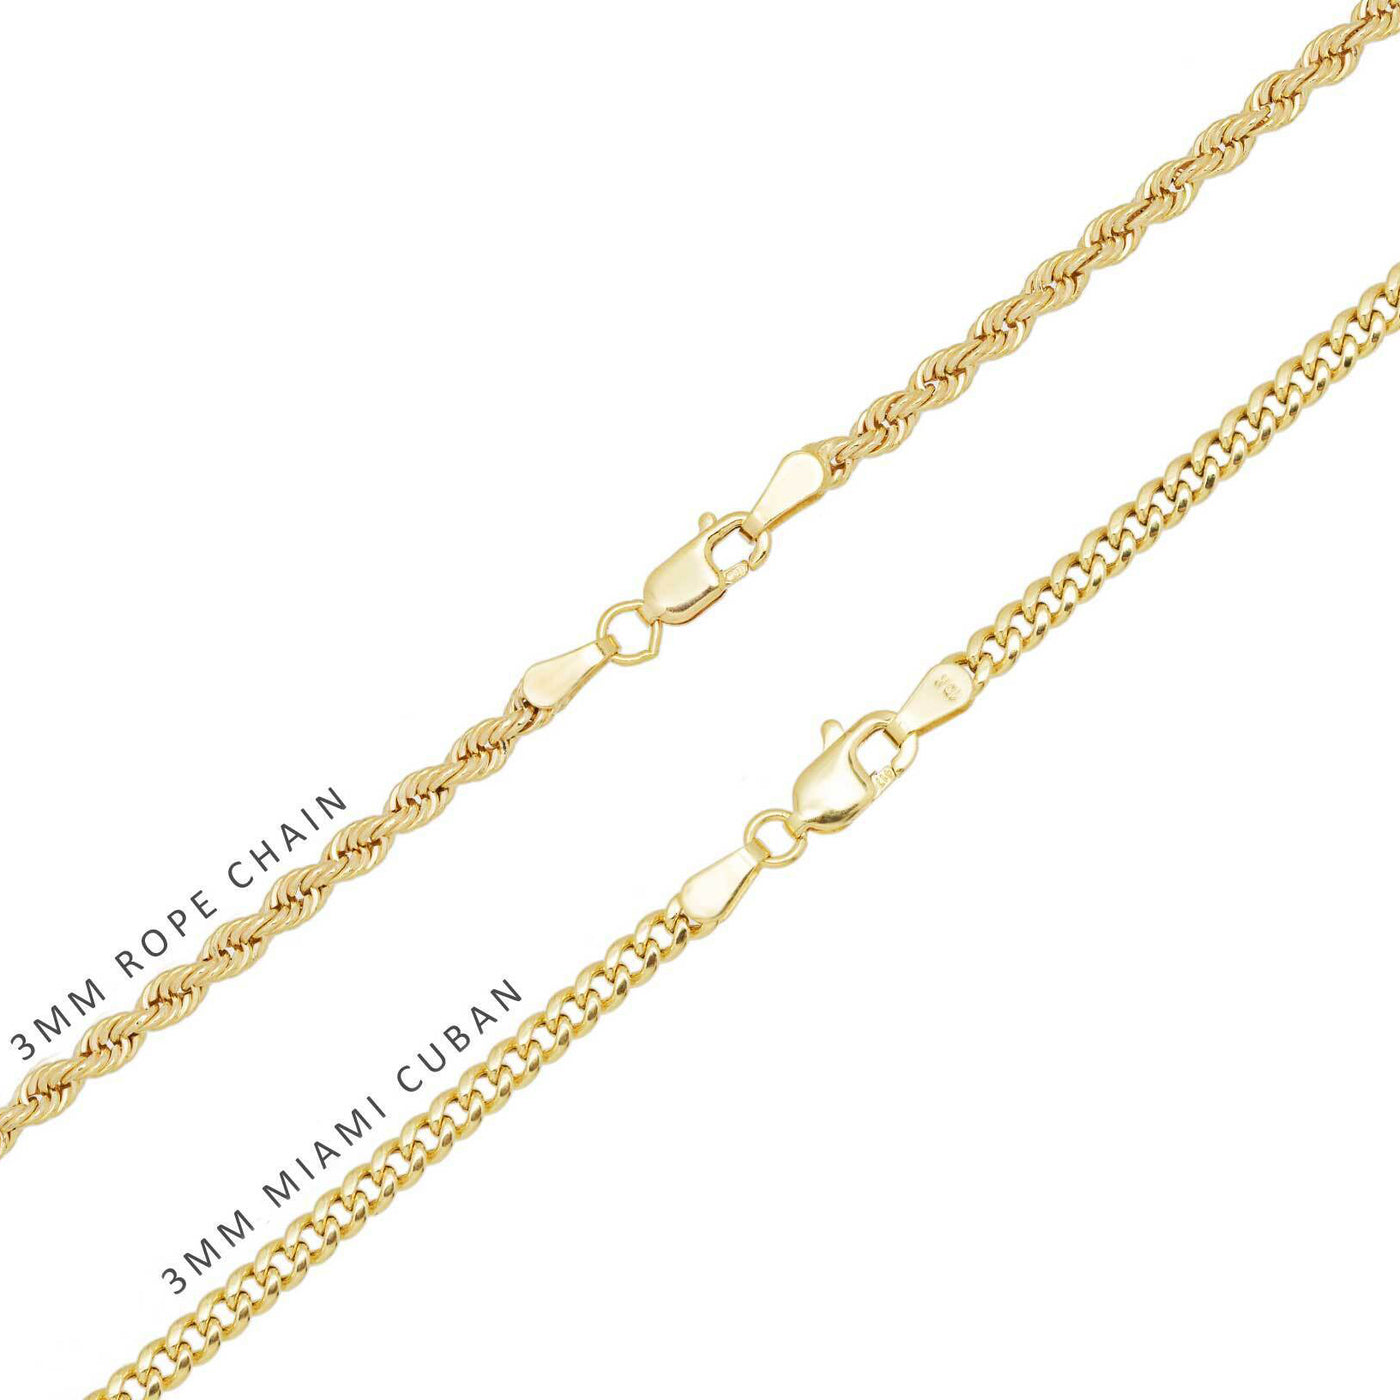 2 1/4" Textured Cross Pendant & Chain Necklace Set 10K Yellow Gold